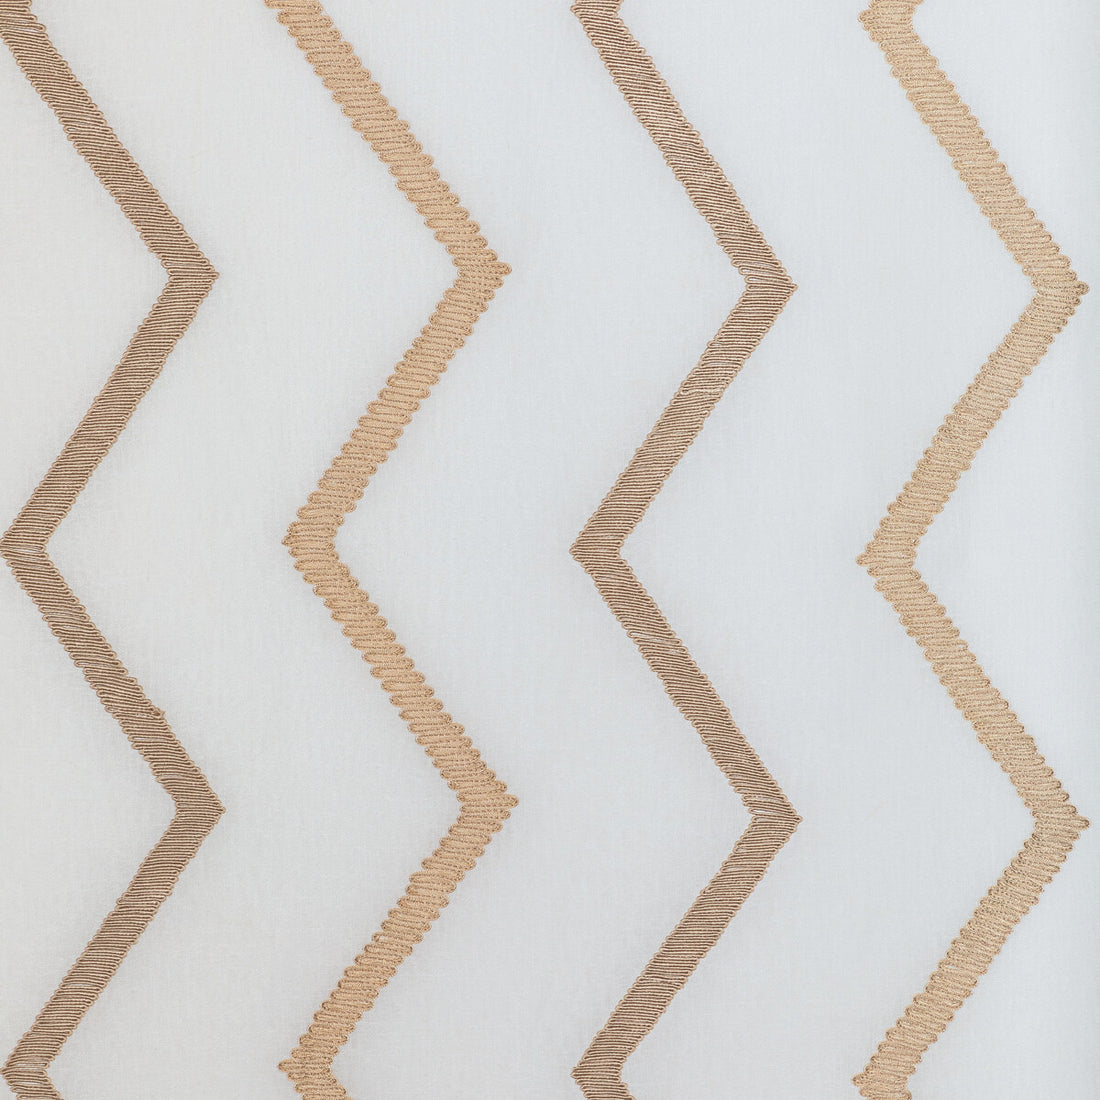 Ribbon Point fabric in champagne color - pattern 4891.16.0 - by Kravet Couture in the Modern Luxe III collection